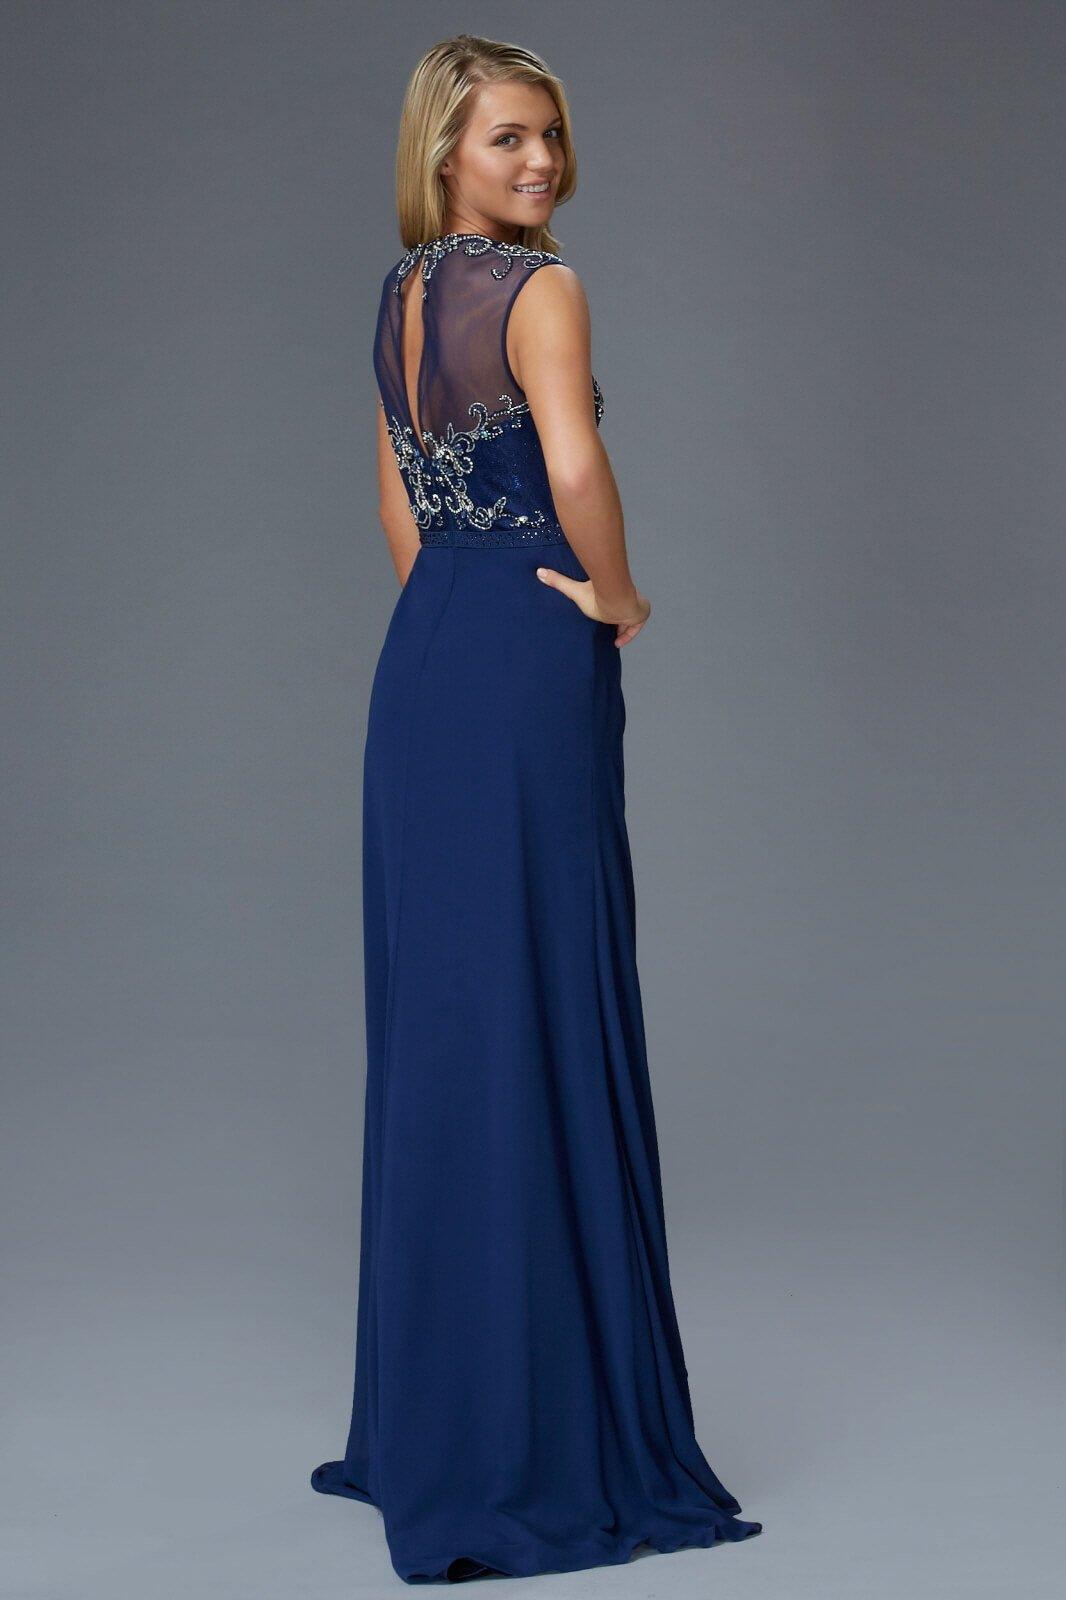 Long Prom Dress Formal Evening Gown Sale - The Dress Outlet